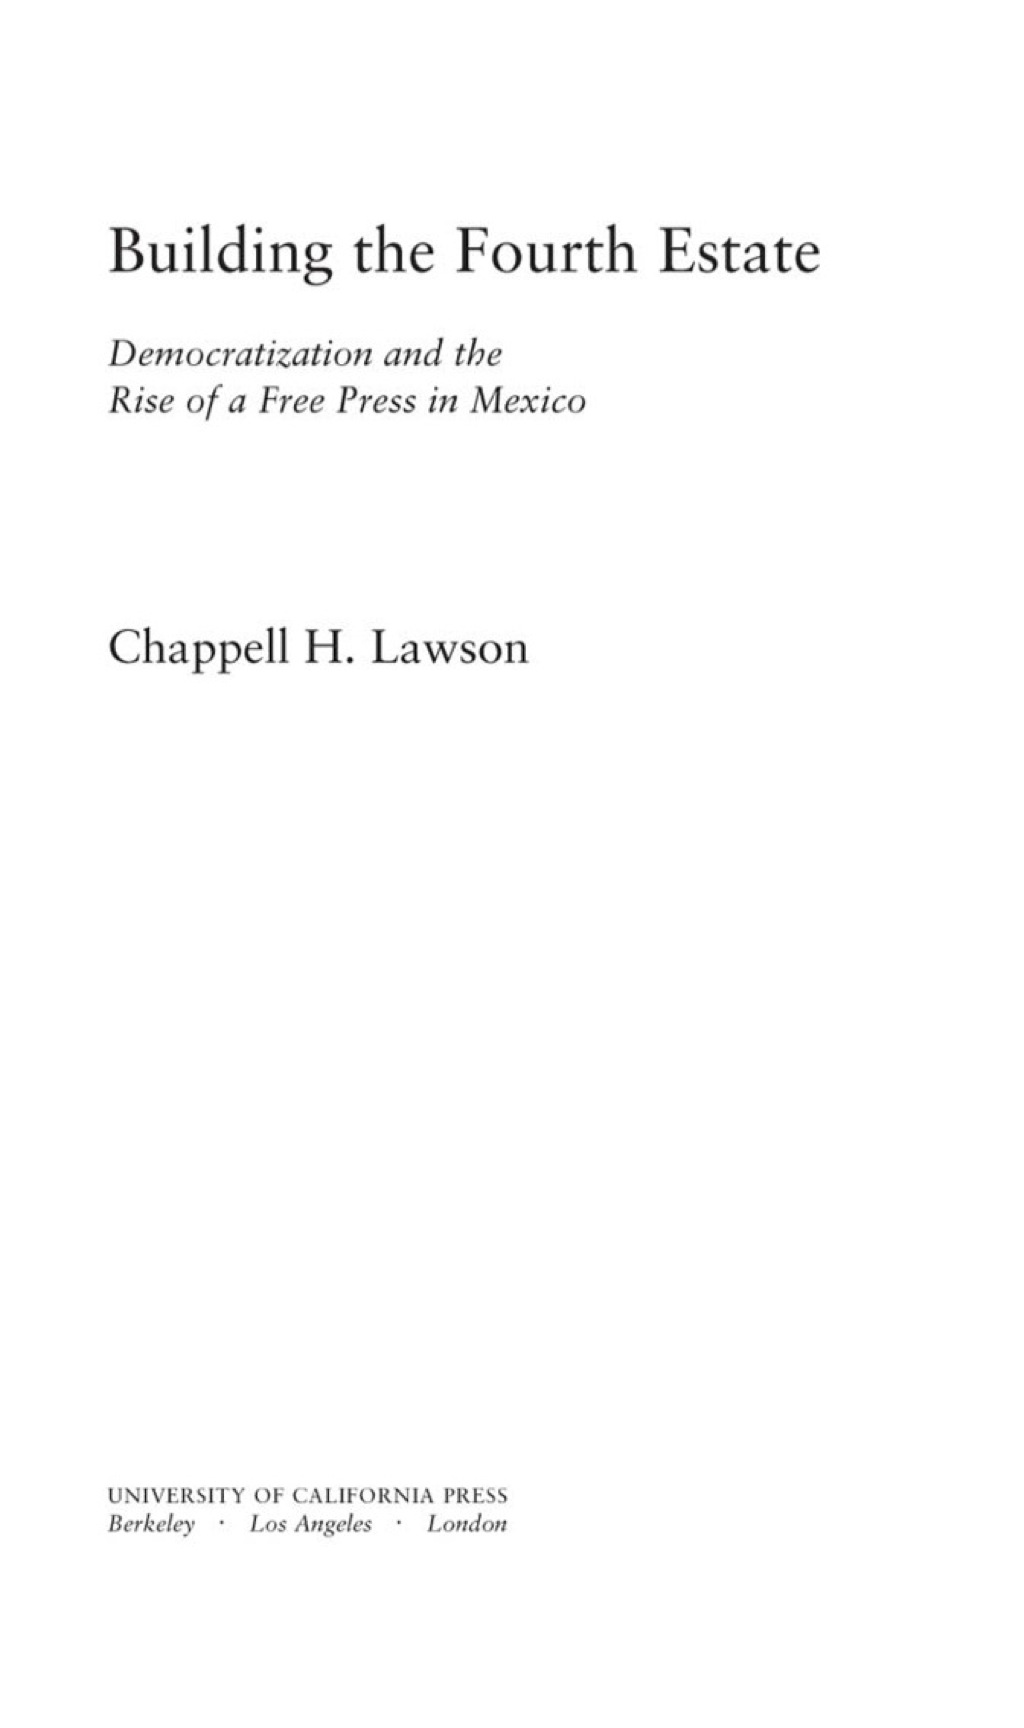 Building the Fourth Estate (eBook) - Chappell Lawson